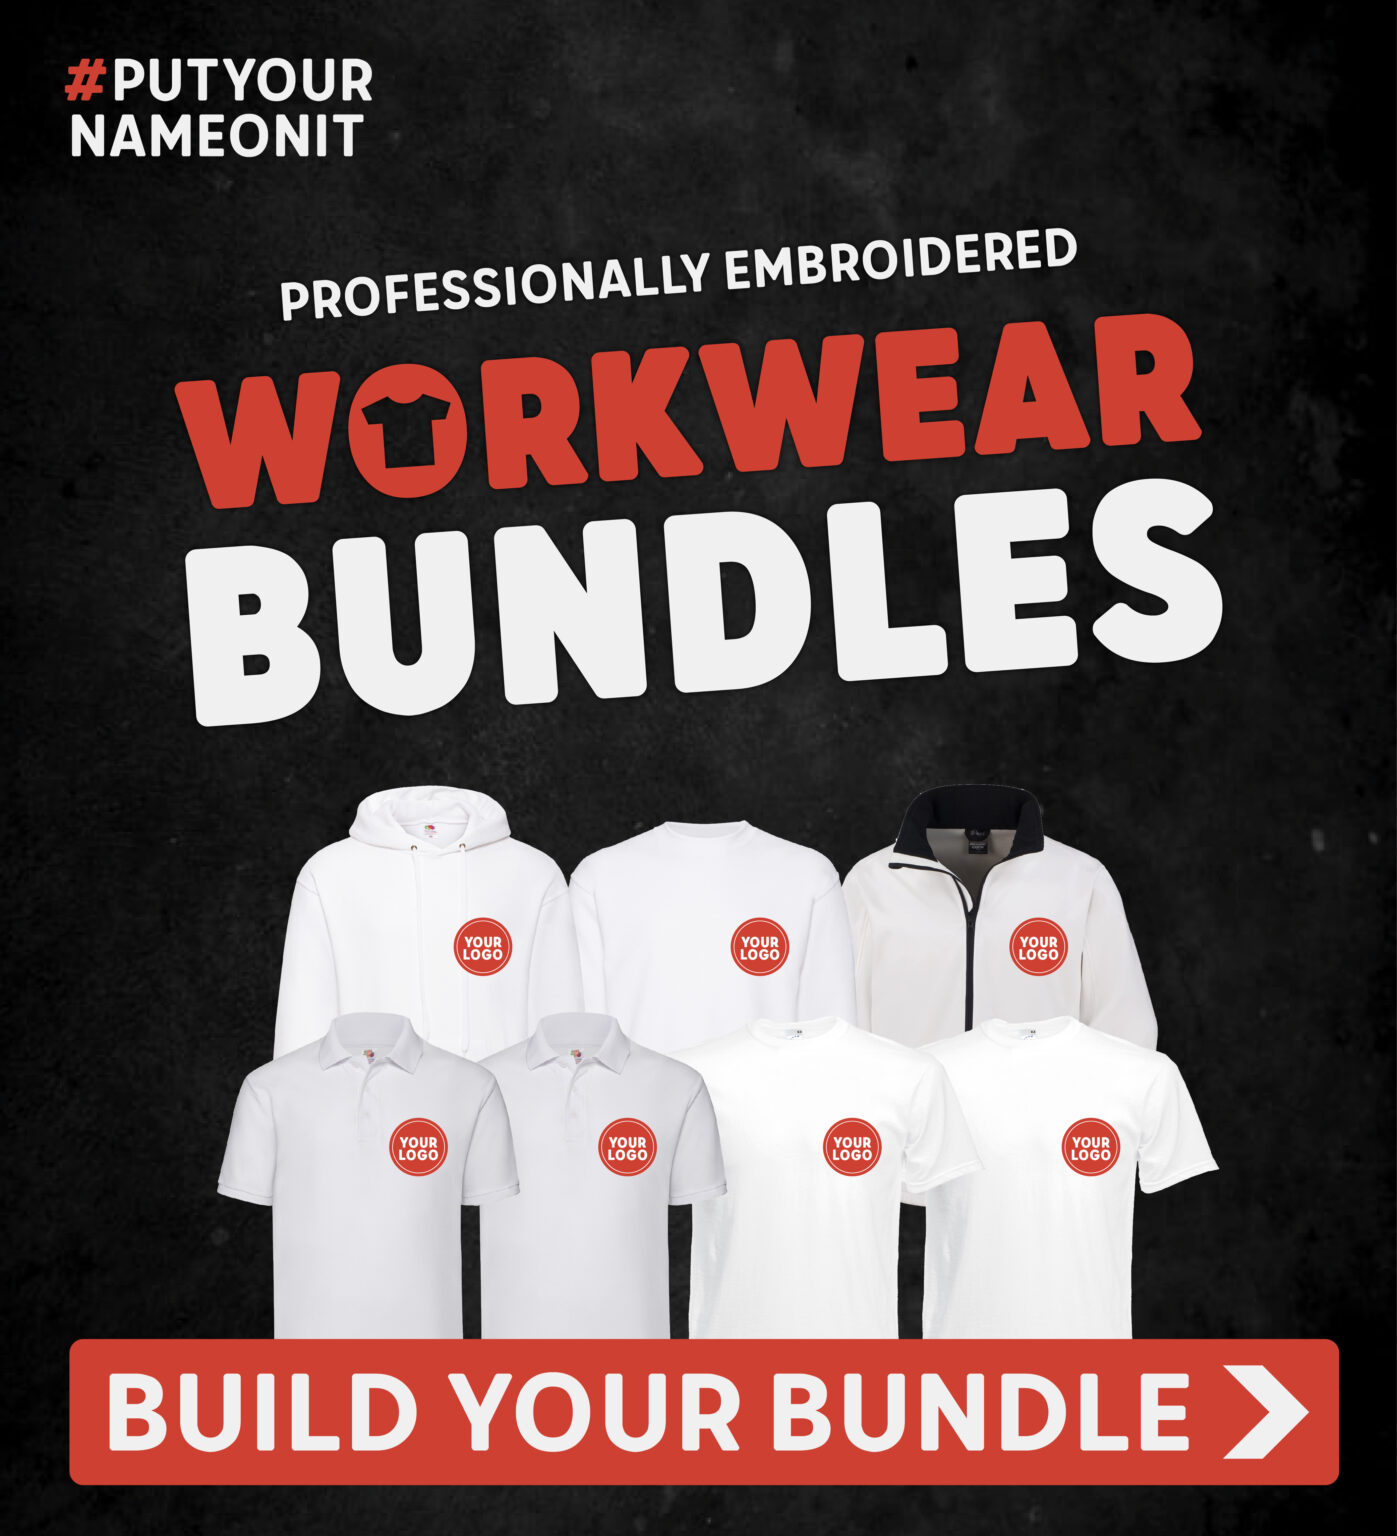 The Workwear Specialists Professionally Embroidered Workwear Bundles Mobile Banner